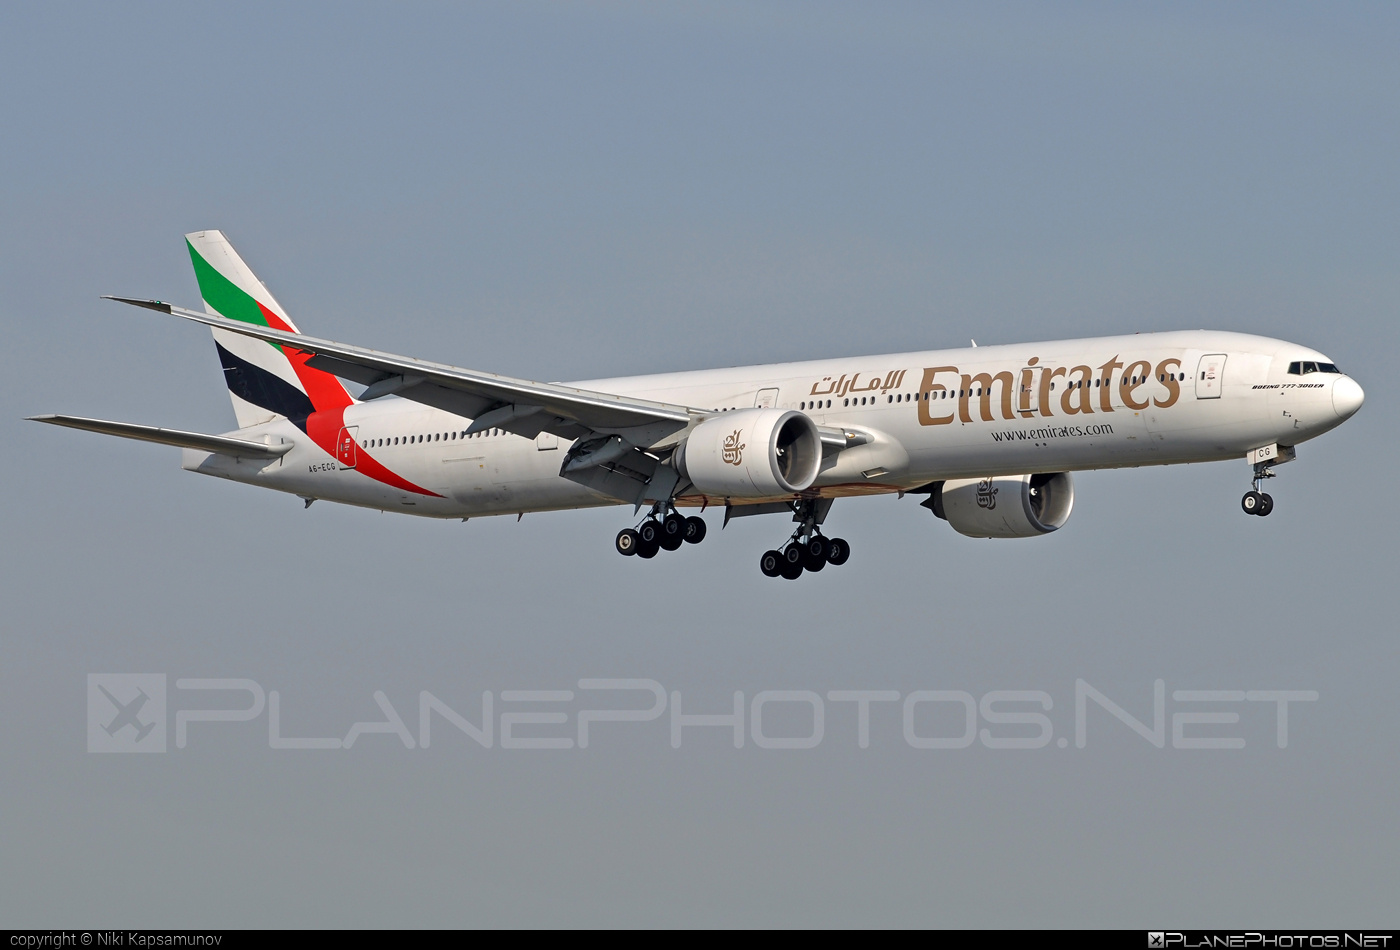 Boeing 777-300ER - A6-ECG operated by Emirates #b777 #b777er #boeing #boeing777 #emirates #tripleseven